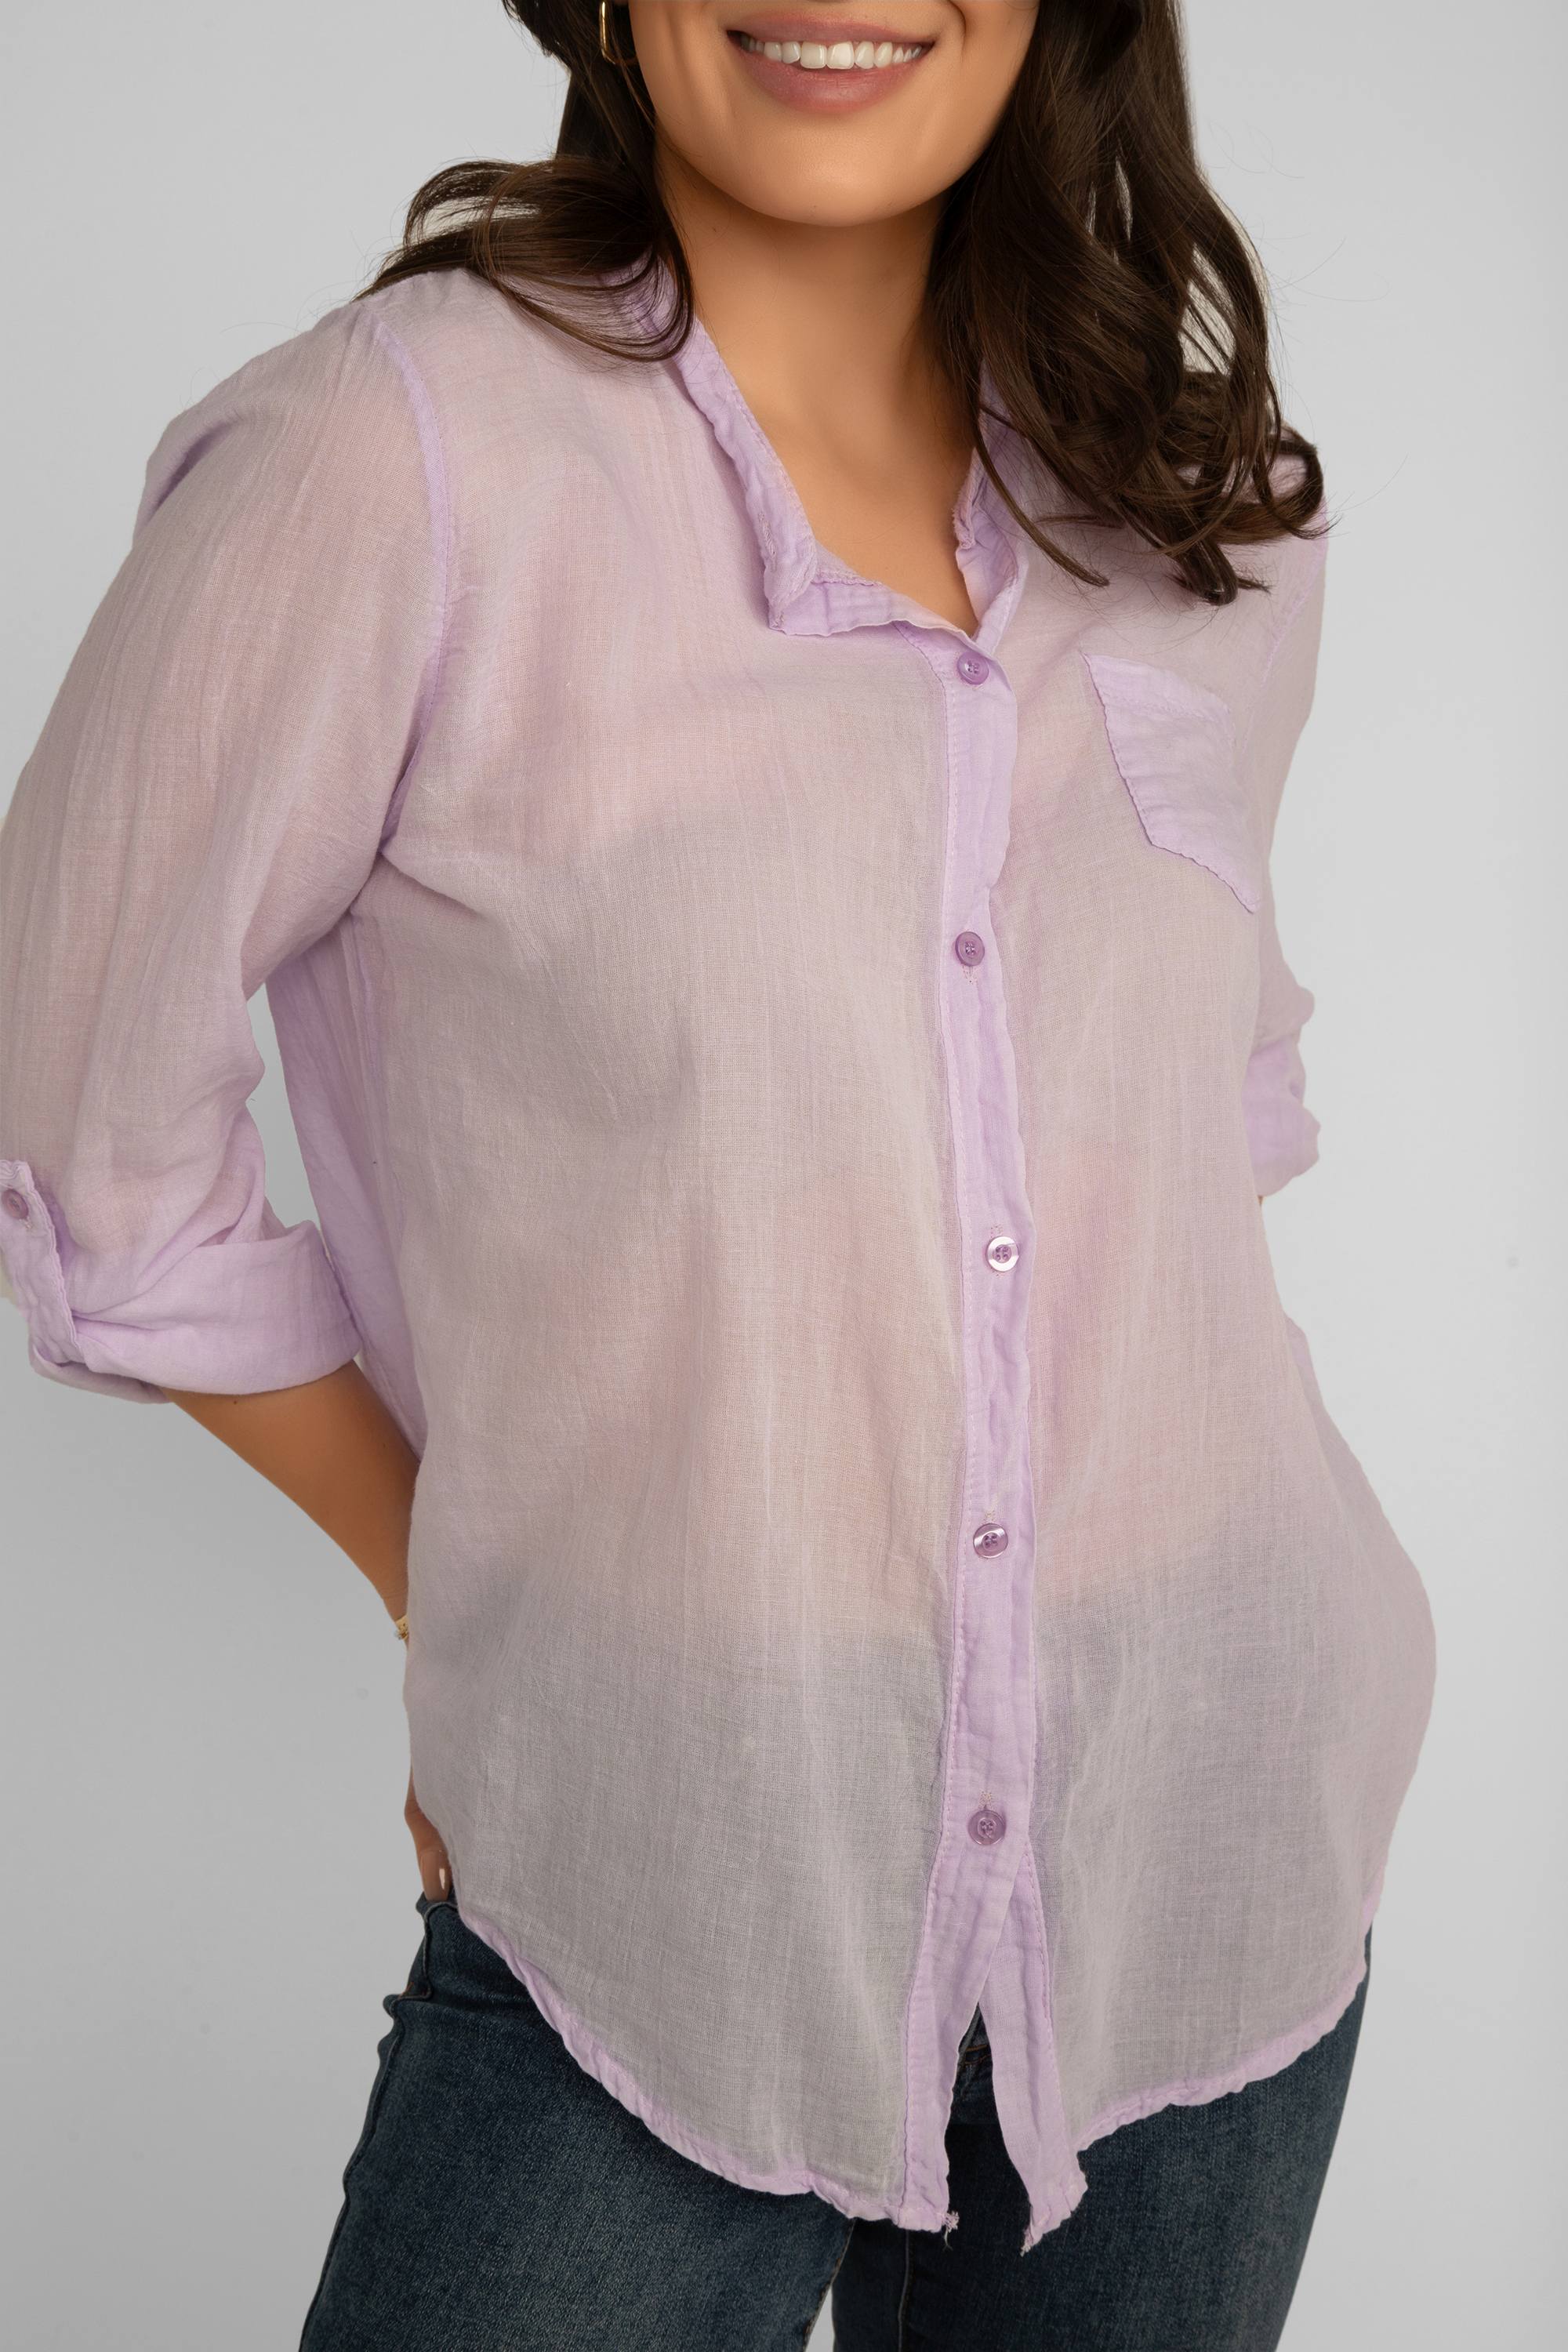 Close up of front view of Elissia (EL847102) Women's Long Sleeve Button Up Shirt With Band Collar and Optional Front Tie in Light Purple